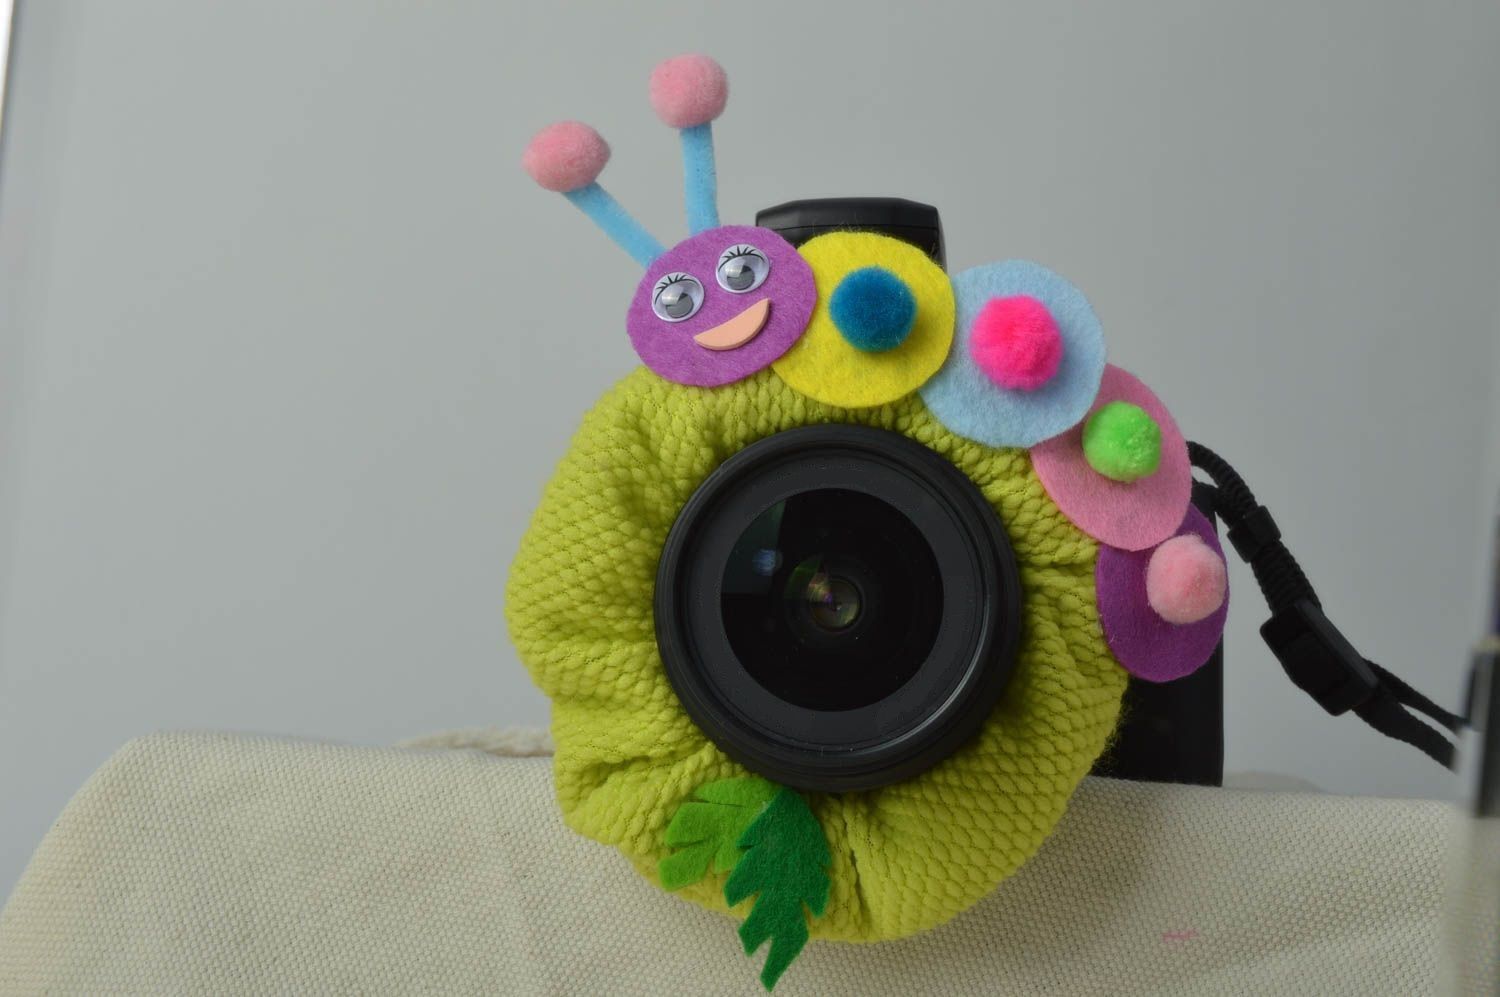 Toy for lens handmade decor for camera unusual stylish lens for camera photo 1